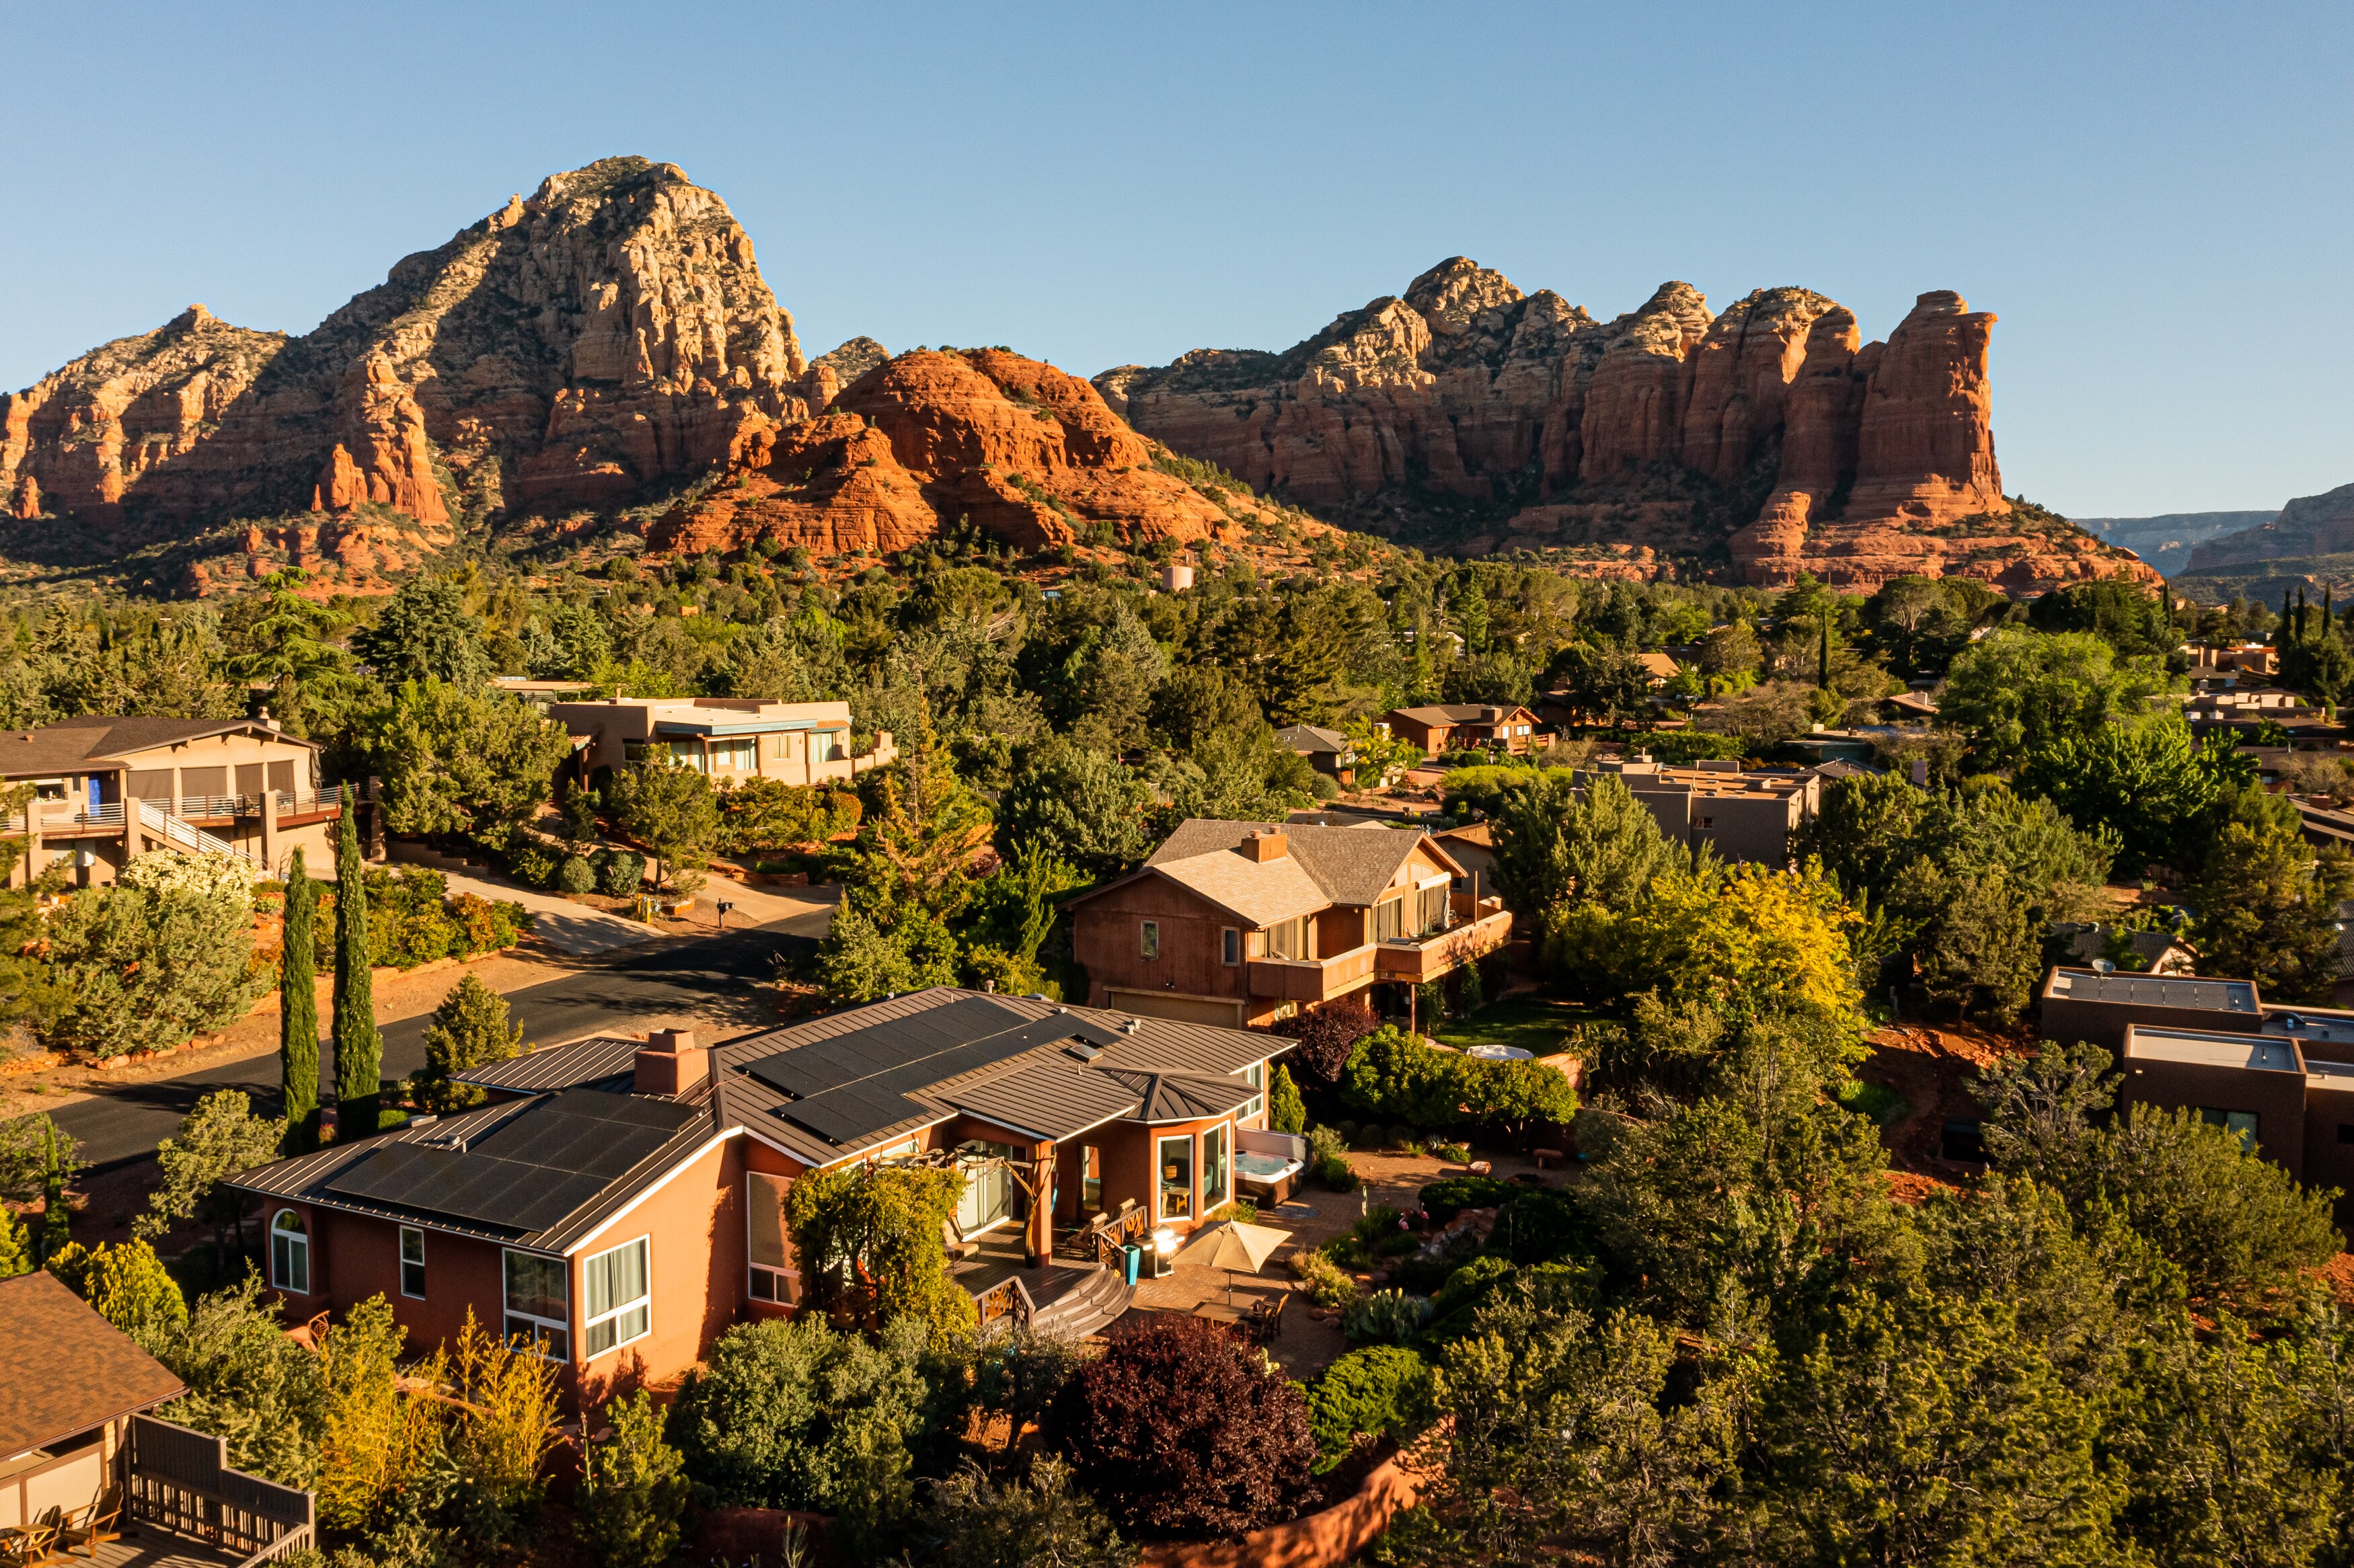 A Sedona Jewel Surrounded by Red Rocks